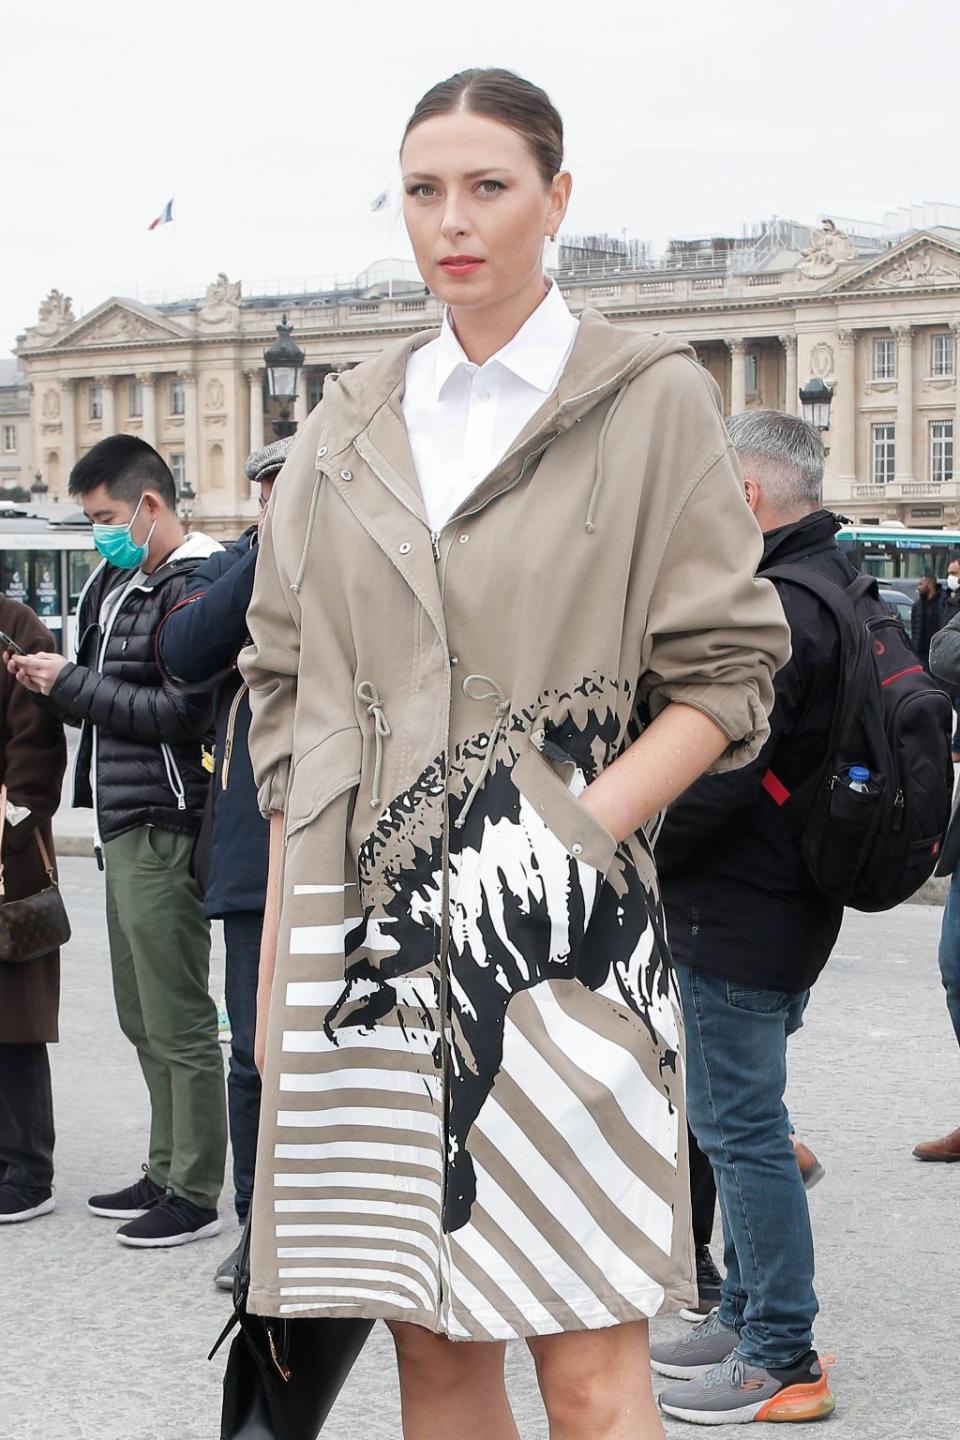 Maria Sharapova arrives at the Dior fashion show during the Paris Fashion Week on March 1, 2022. - Credit: ©Spread Pictures / MEGA